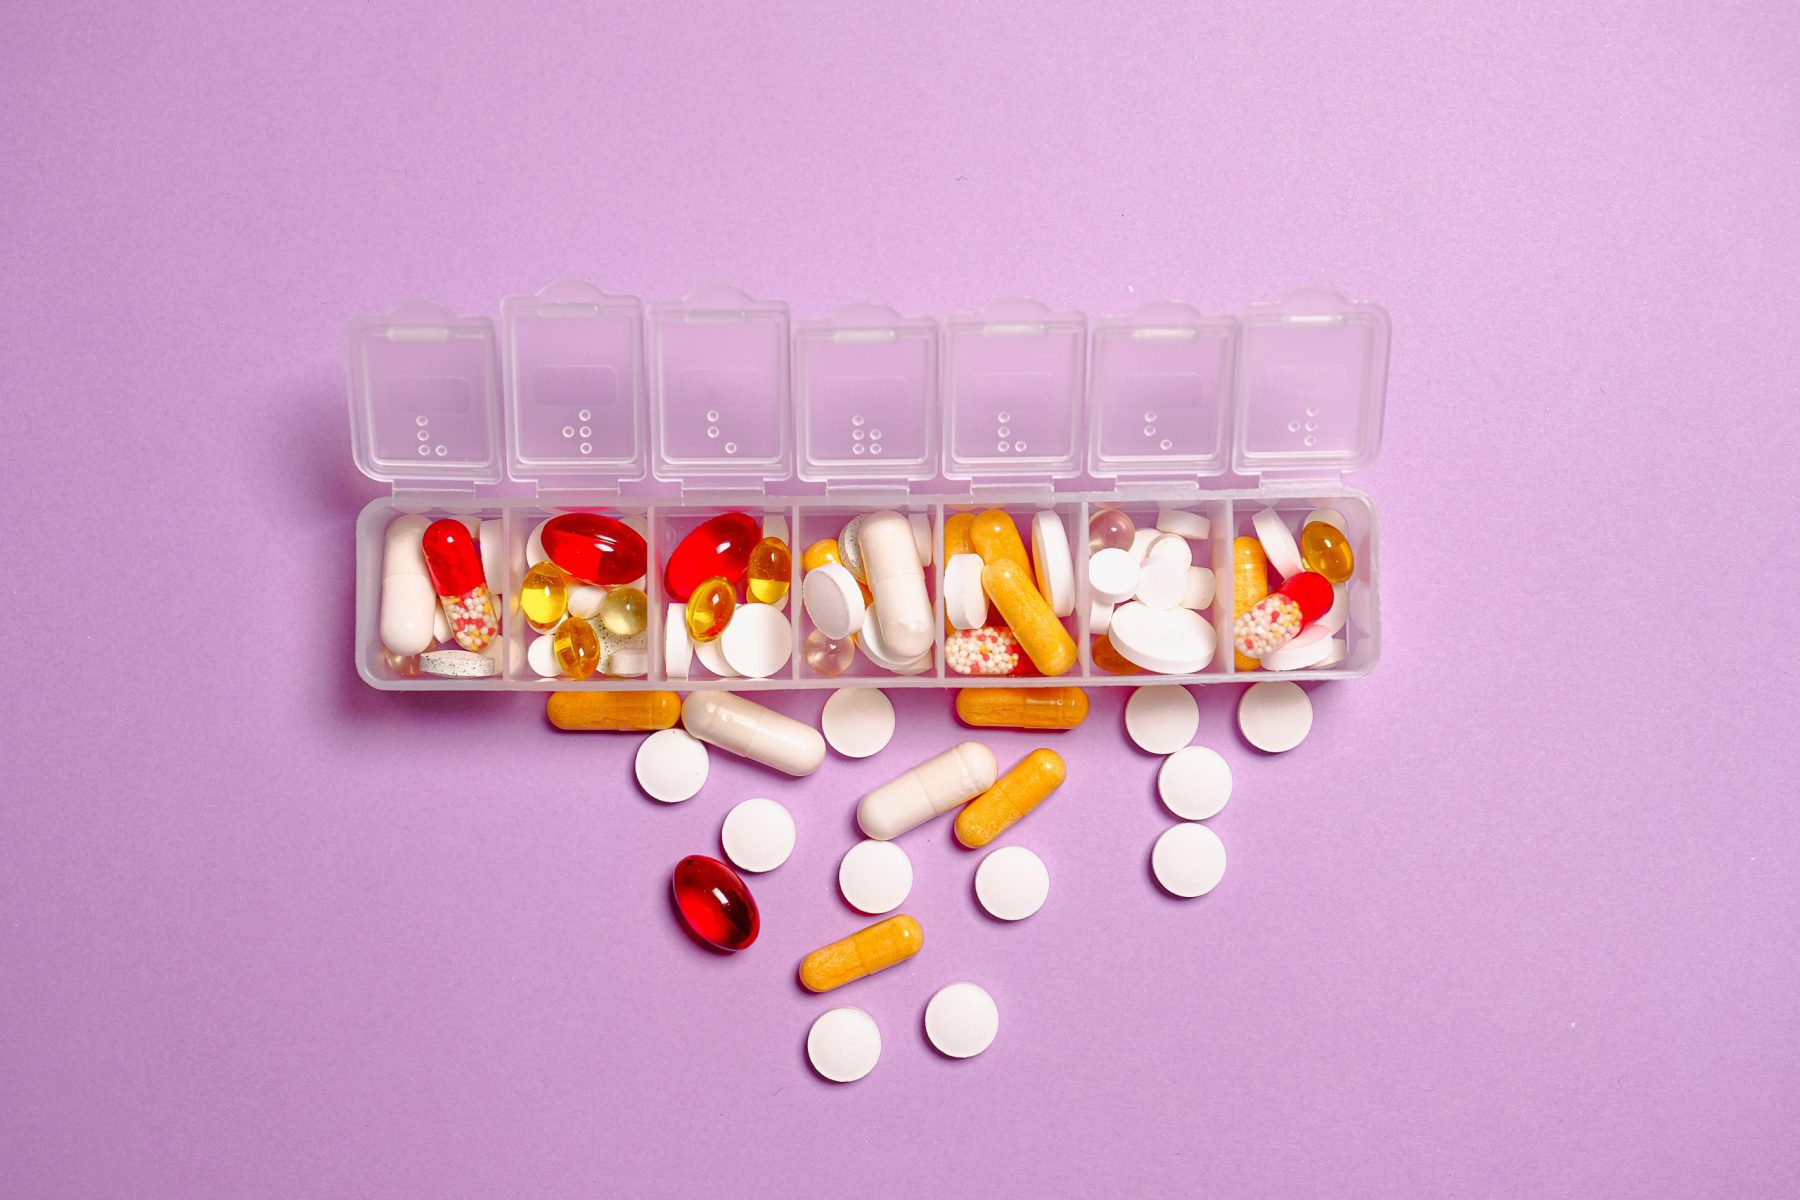 A weekly pill container overflowing with vitamins on a purple background